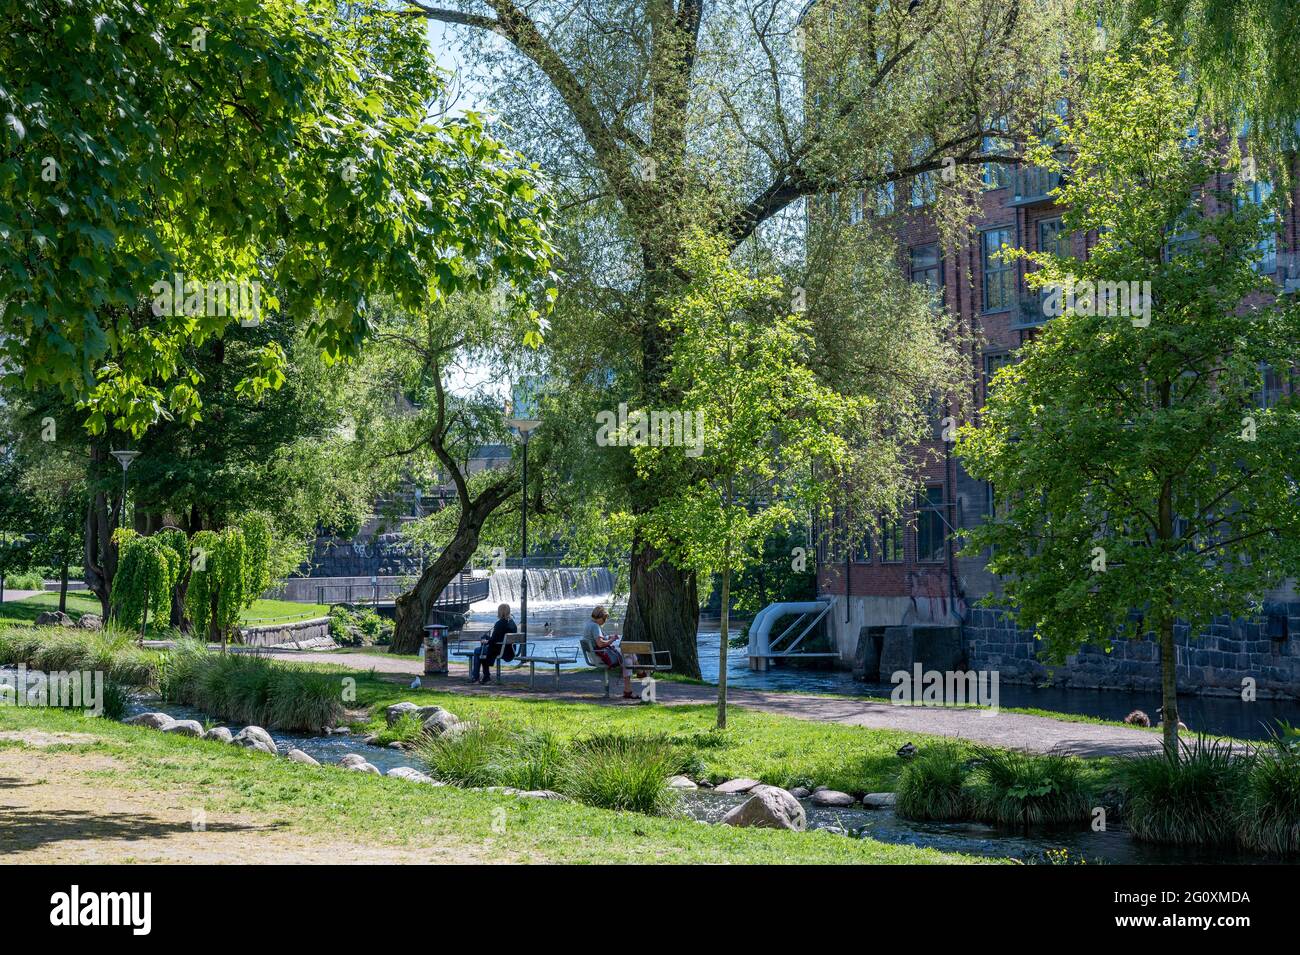 People relax in waterfront park Stromparken during early summer in Norrkoping, Sweden. Norrkoping is a historic industrial town. Stock Photo